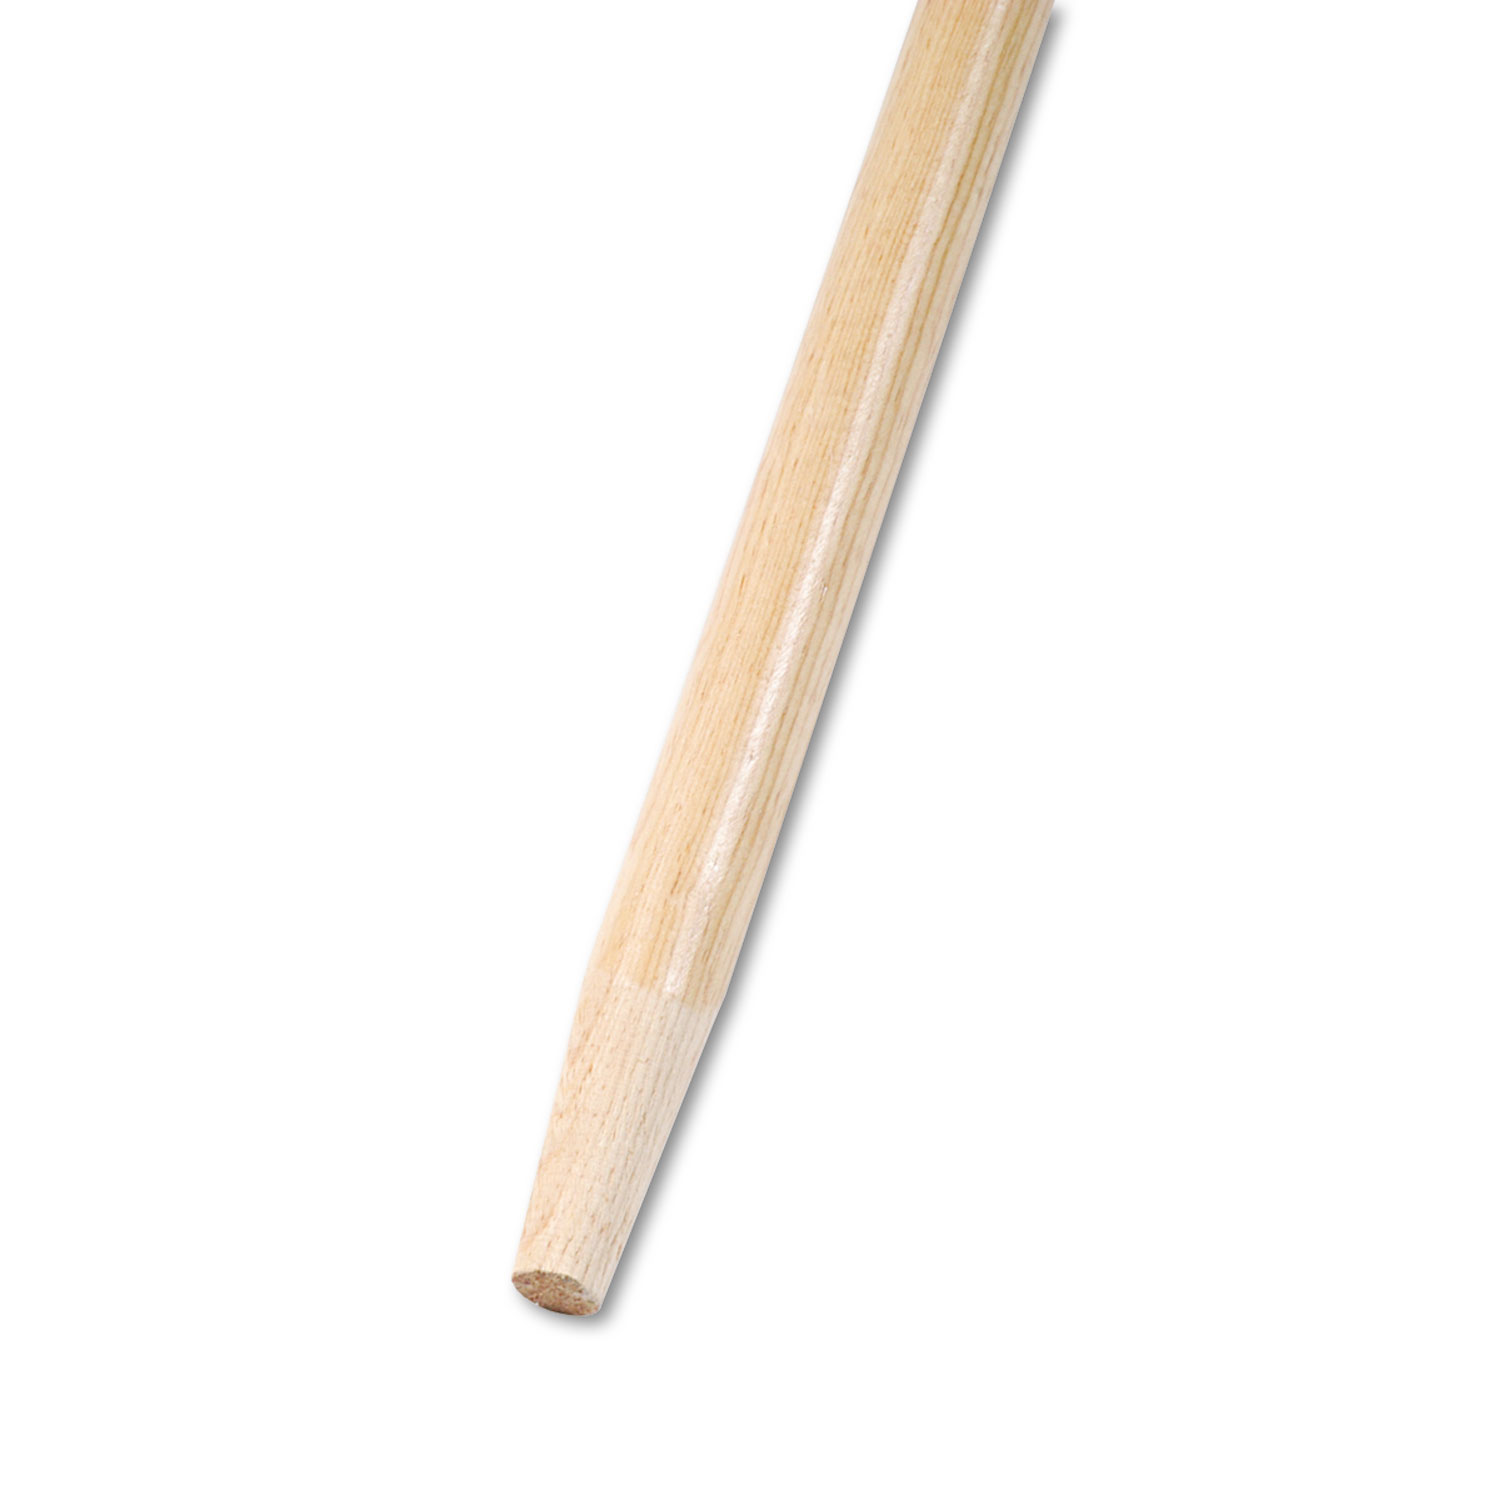  Boardwalk BWK125 Tapered End Broom Handle, Lacquered Hardwood, 1 1/8 Dia. x 60 Long (BWK125) 